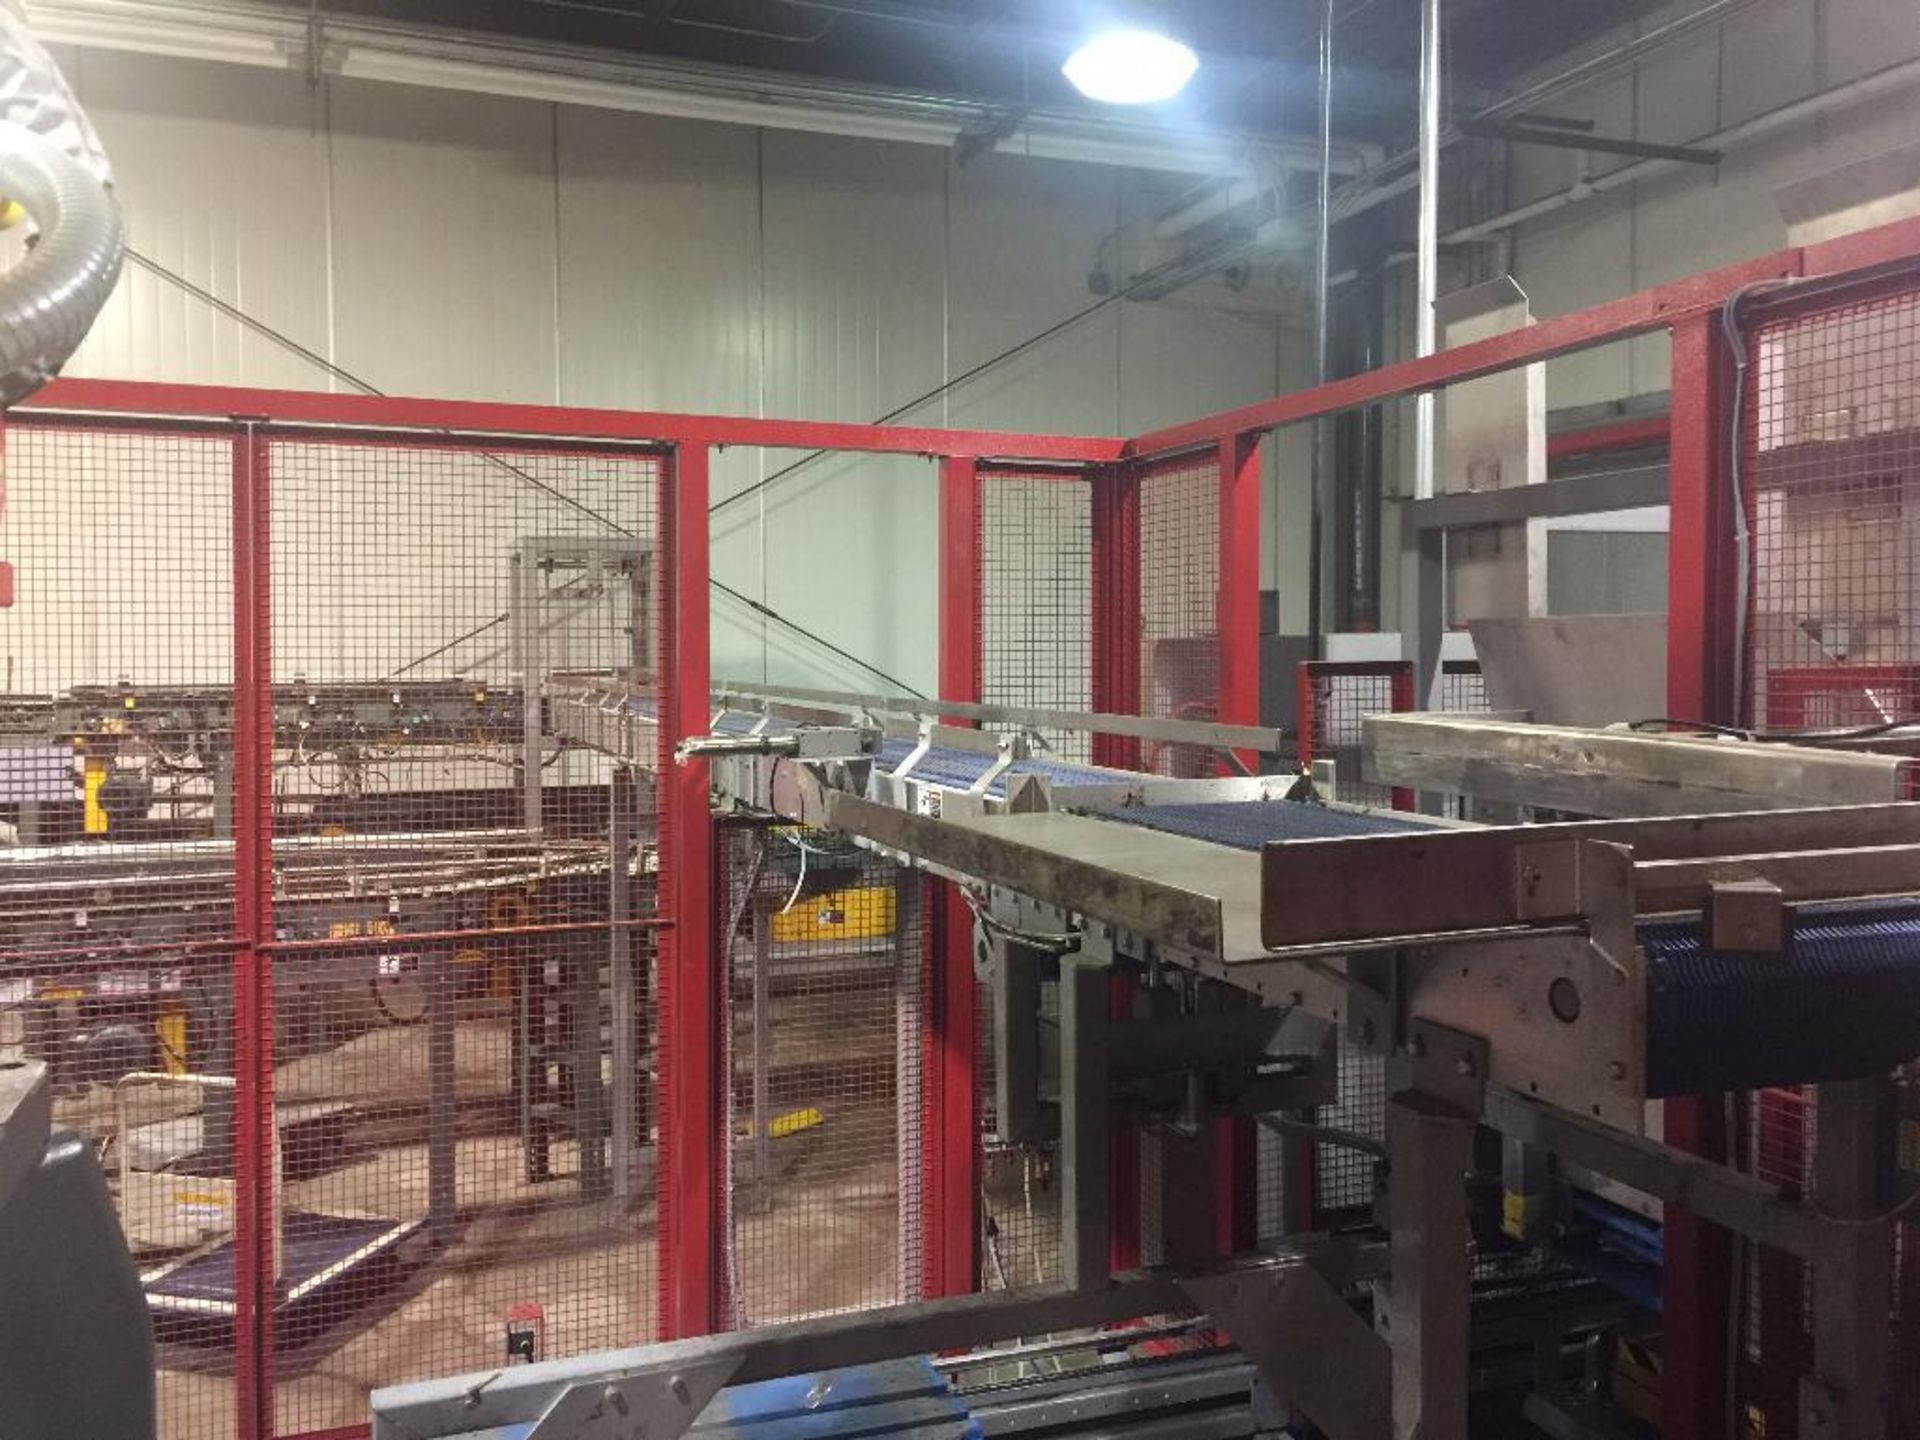 2005 Flexicell robotic dual pallet palletizer, SN 170, single lane infeed from one side, 30 ft. long - Image 40 of 40